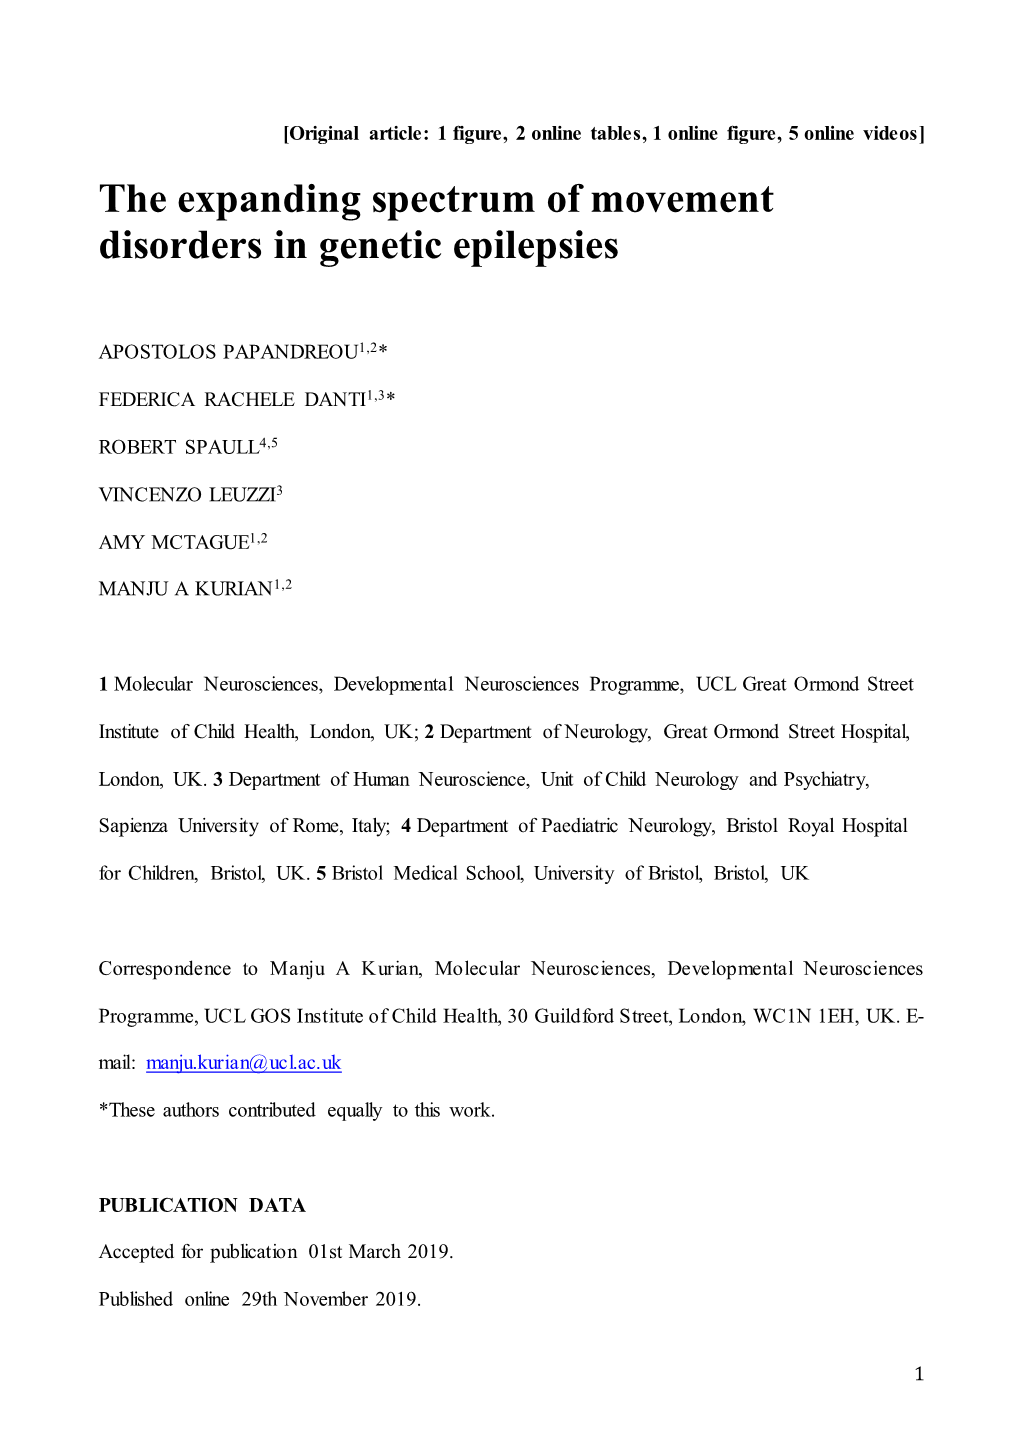 Epilepsy and Movement Disorders in Inborn Errors of Metabolism